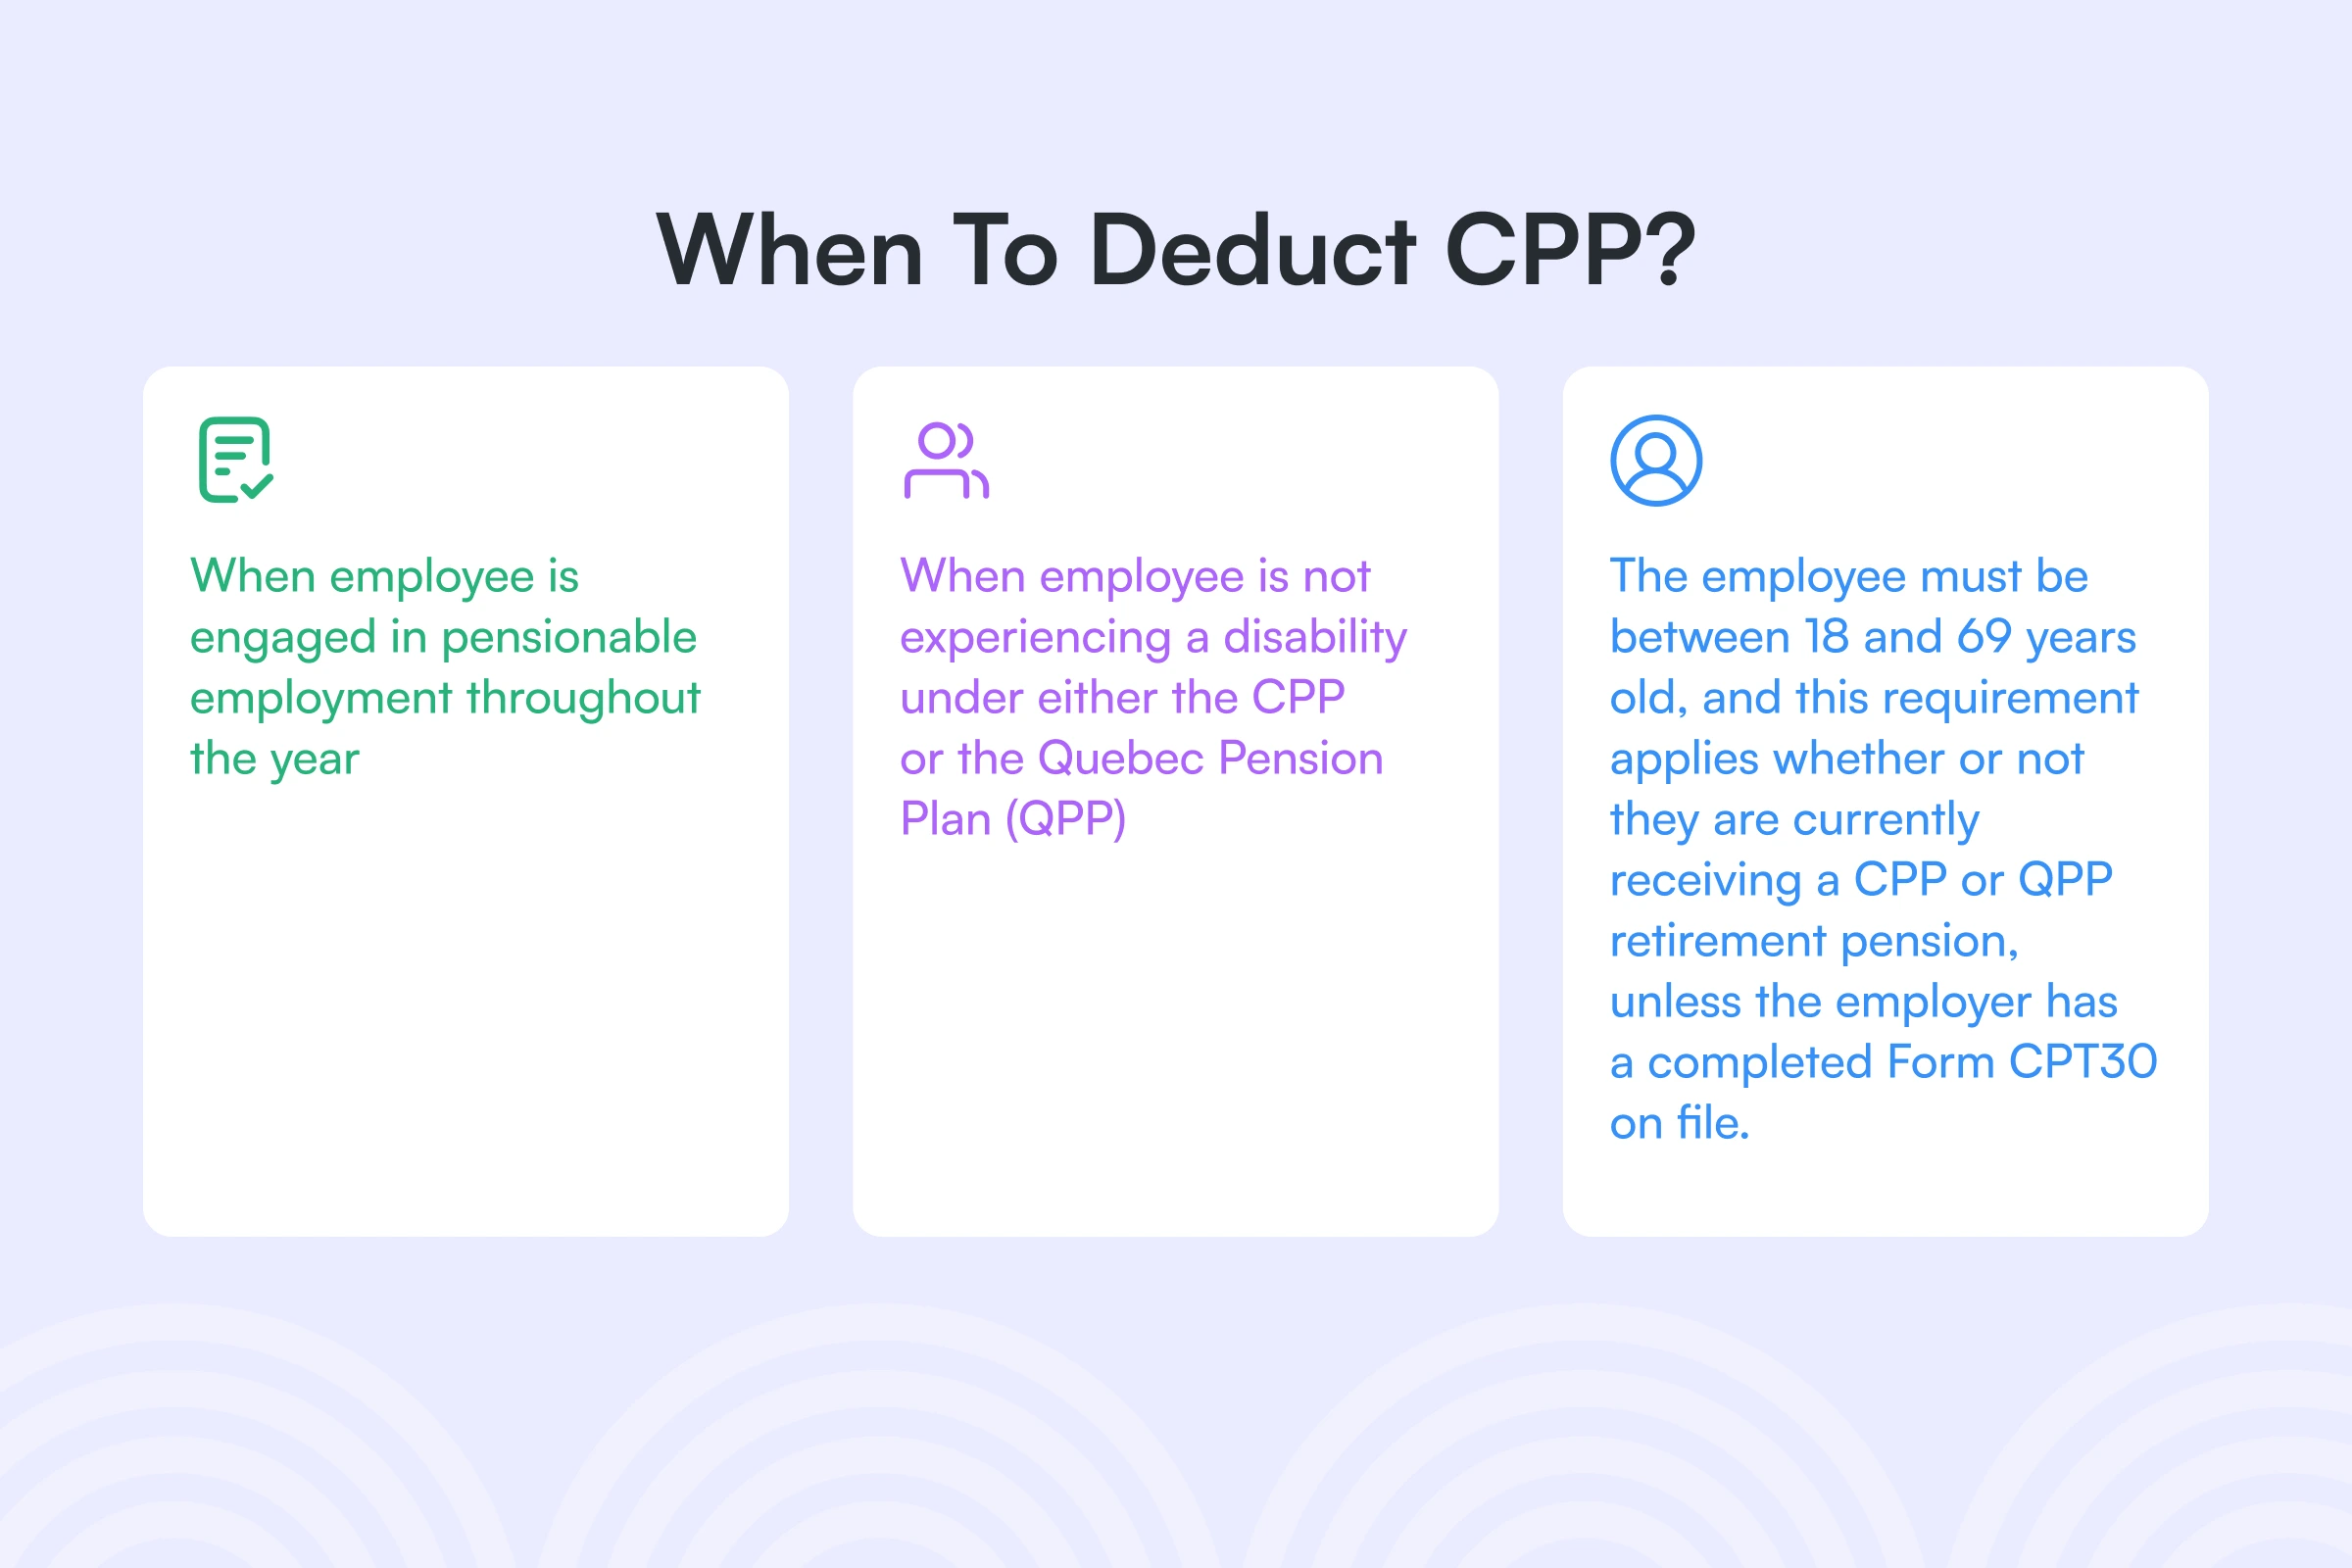 When to deduct CPP?